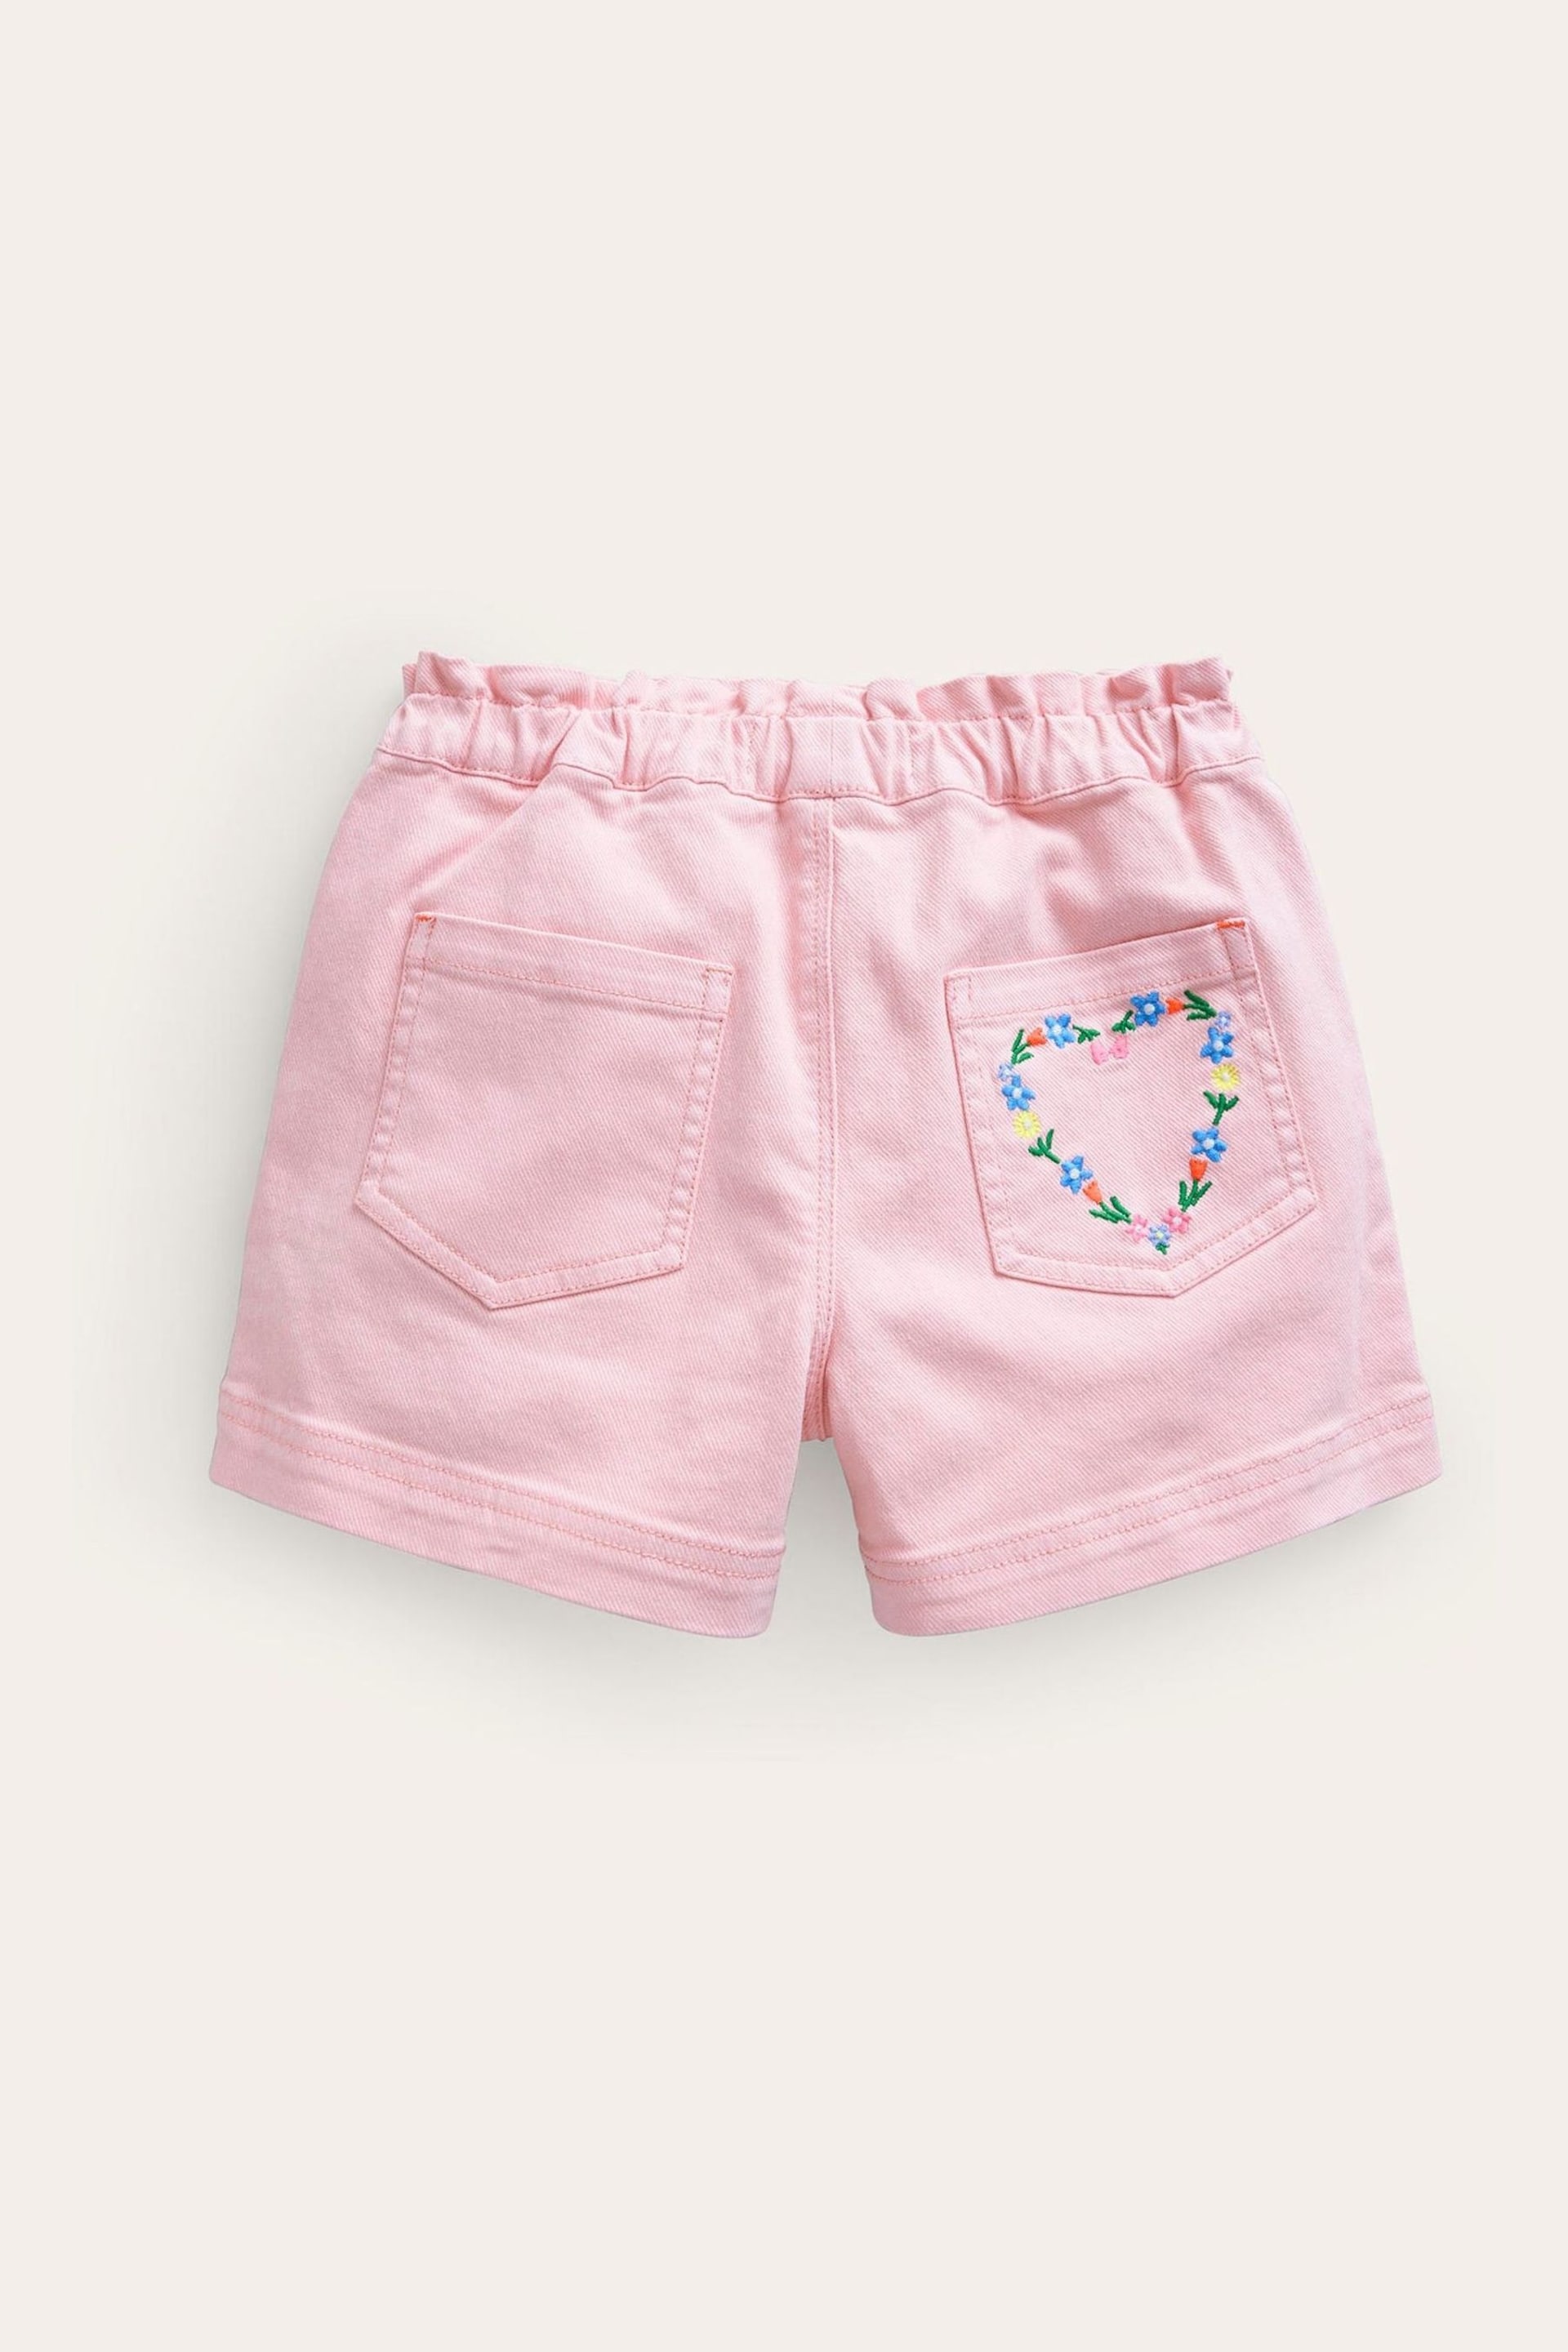 Boden Pink Pull-on Shorts - Image 2 of 3